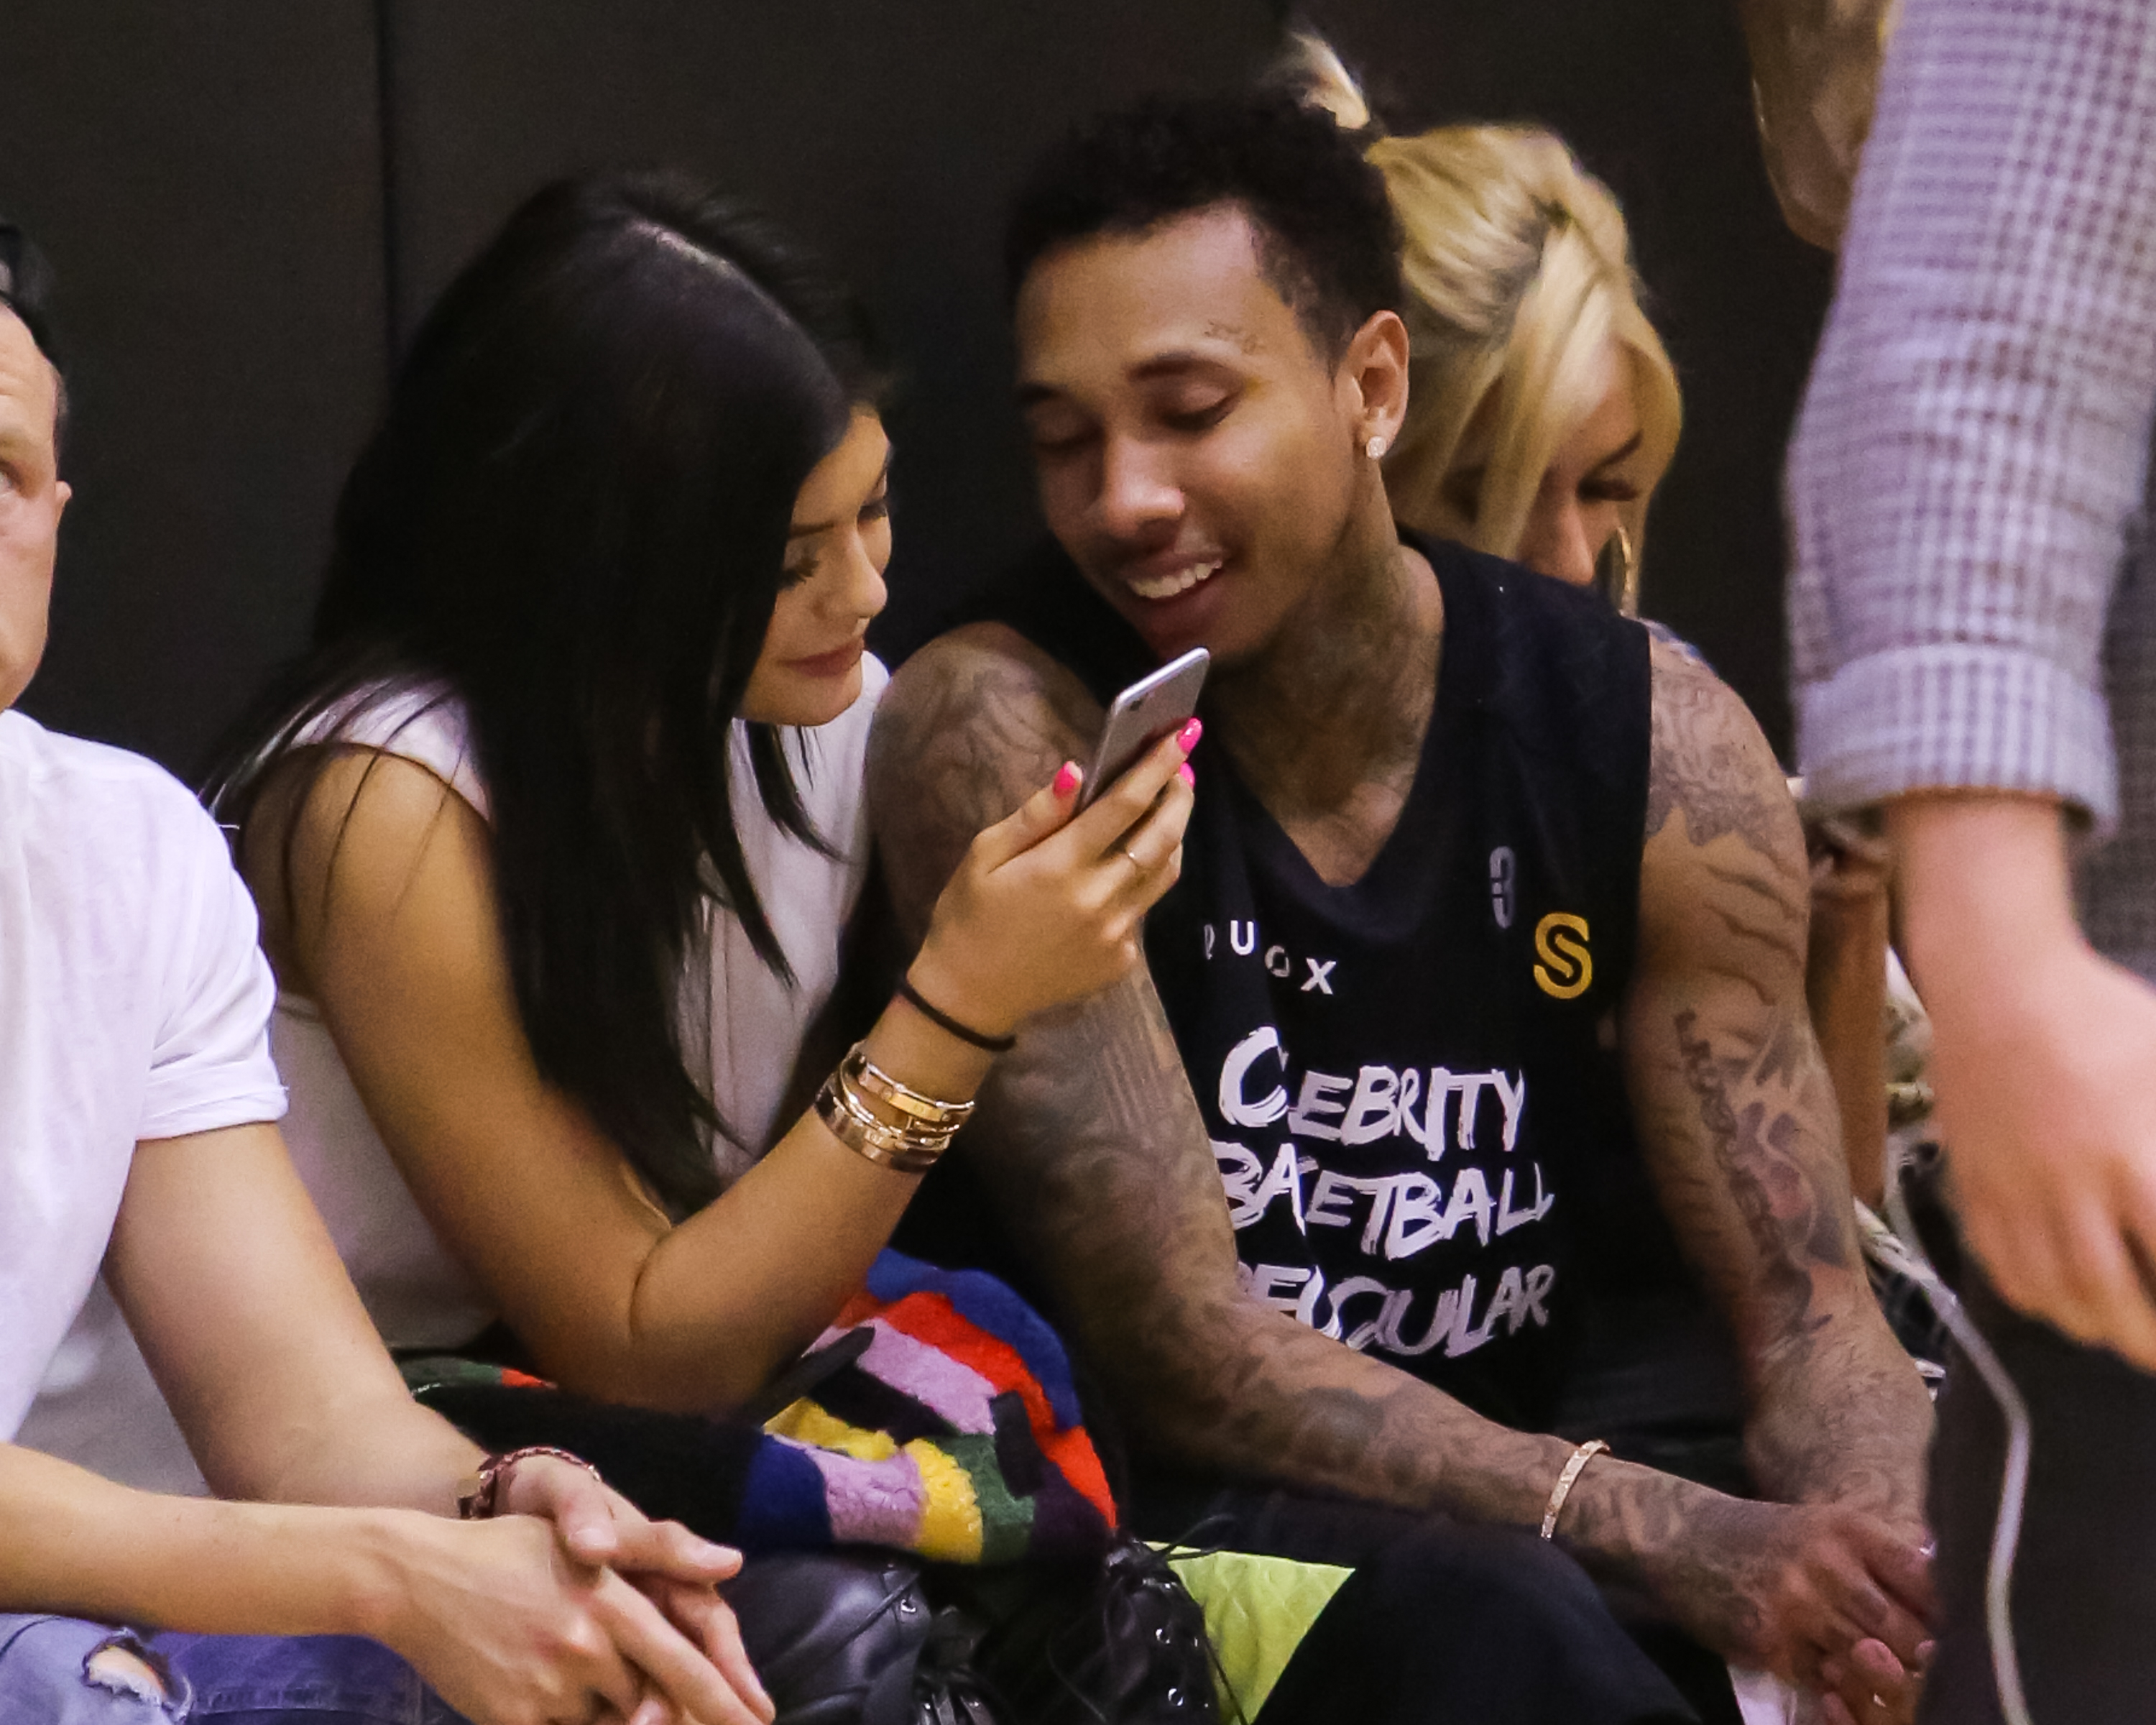 Close-up of Tyga and Kylie sitting together